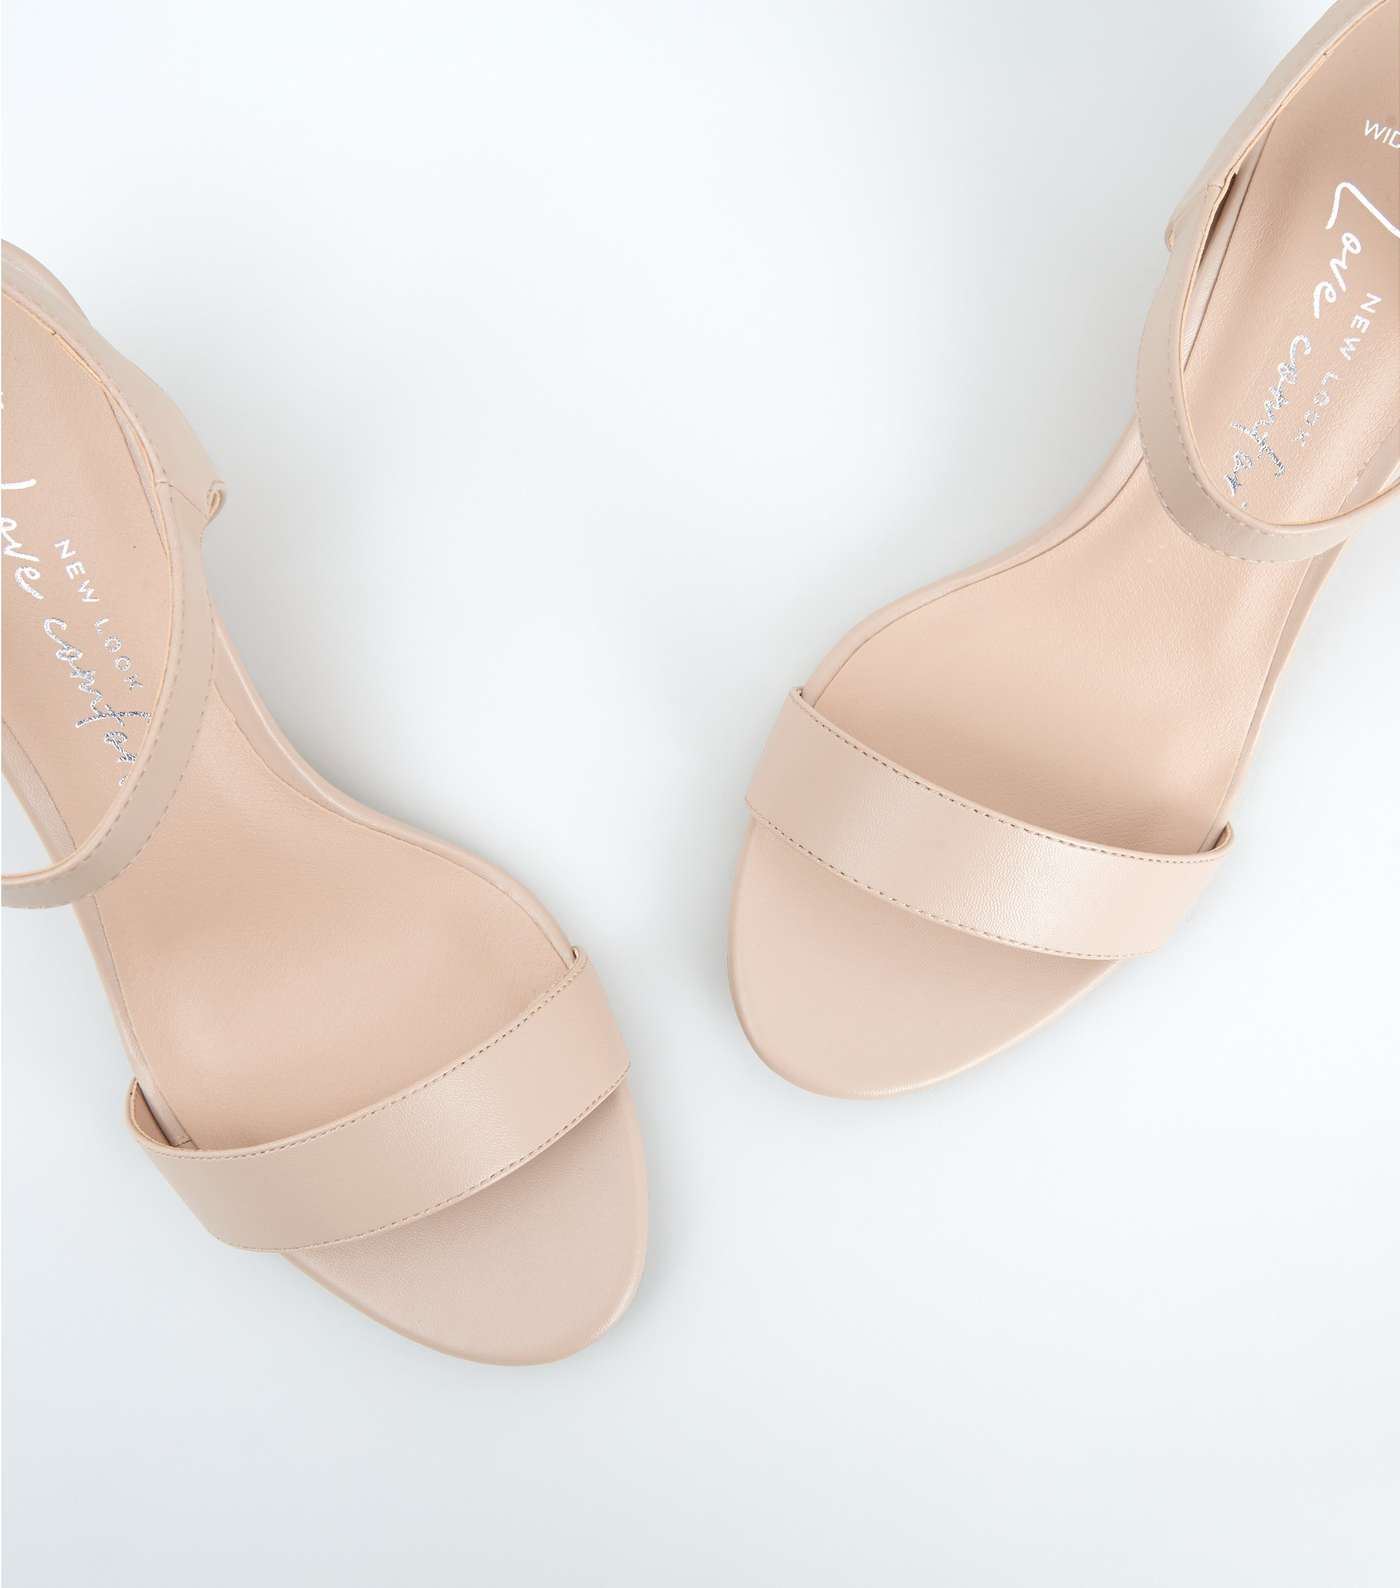 Wide Fit Pale Pink 2 Part Wedge Sandals Image 4